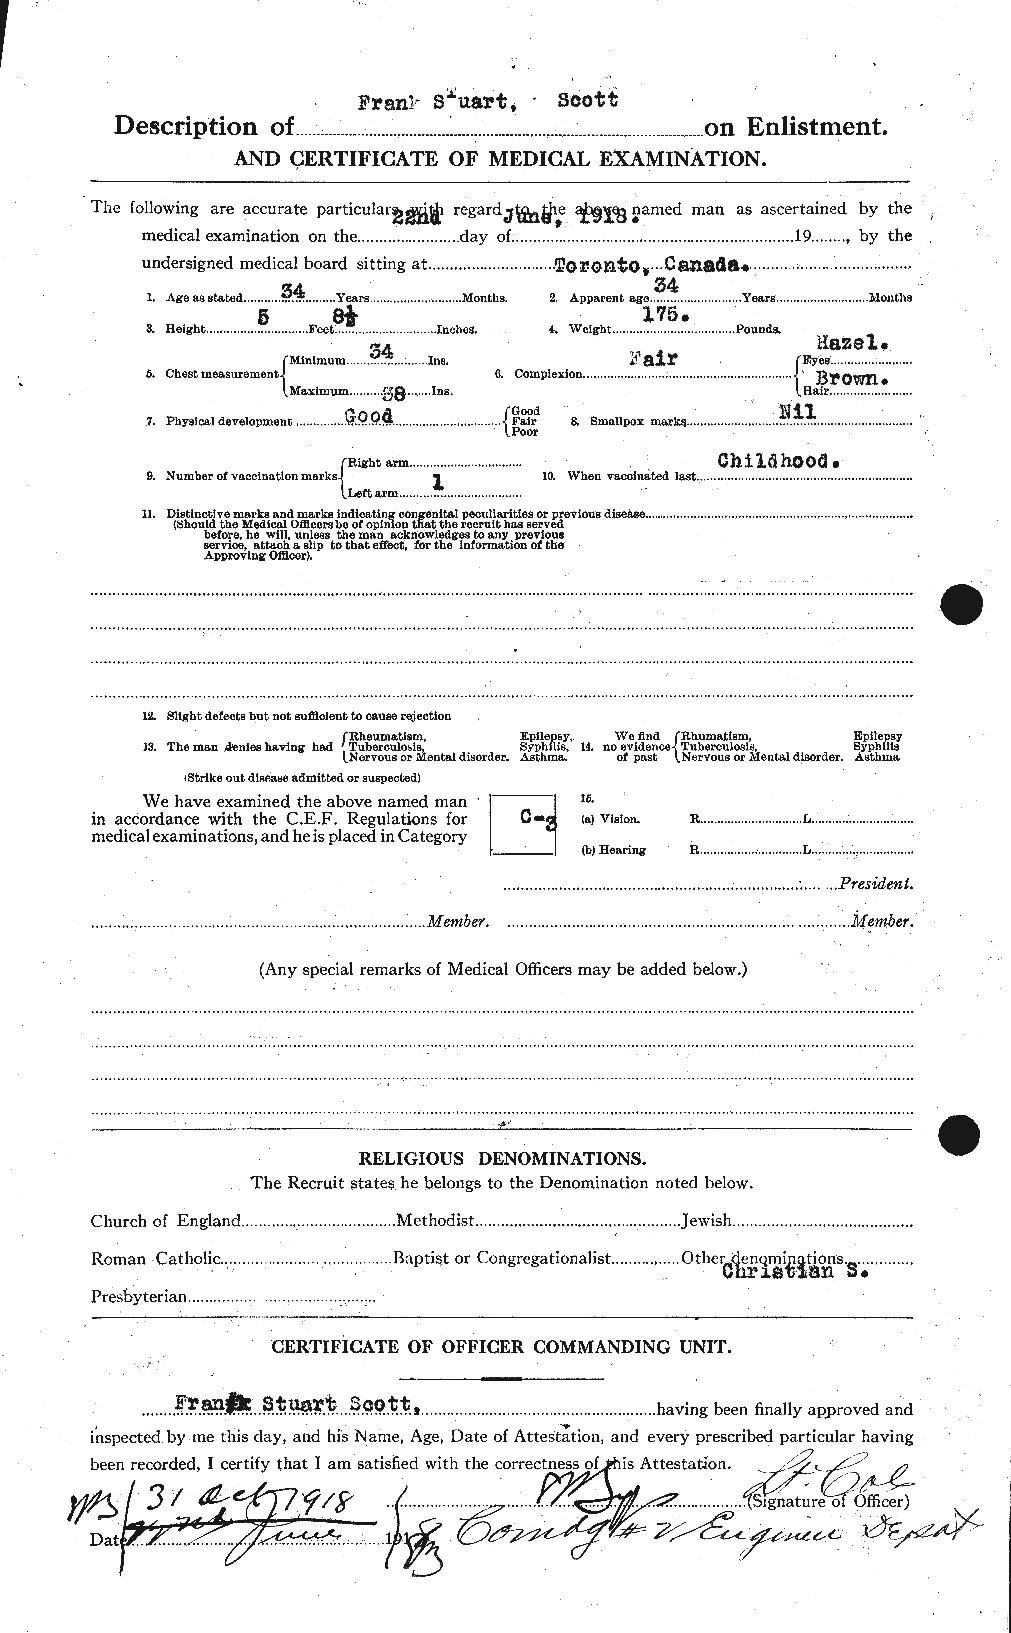 Personnel Records of the First World War - CEF 084690b